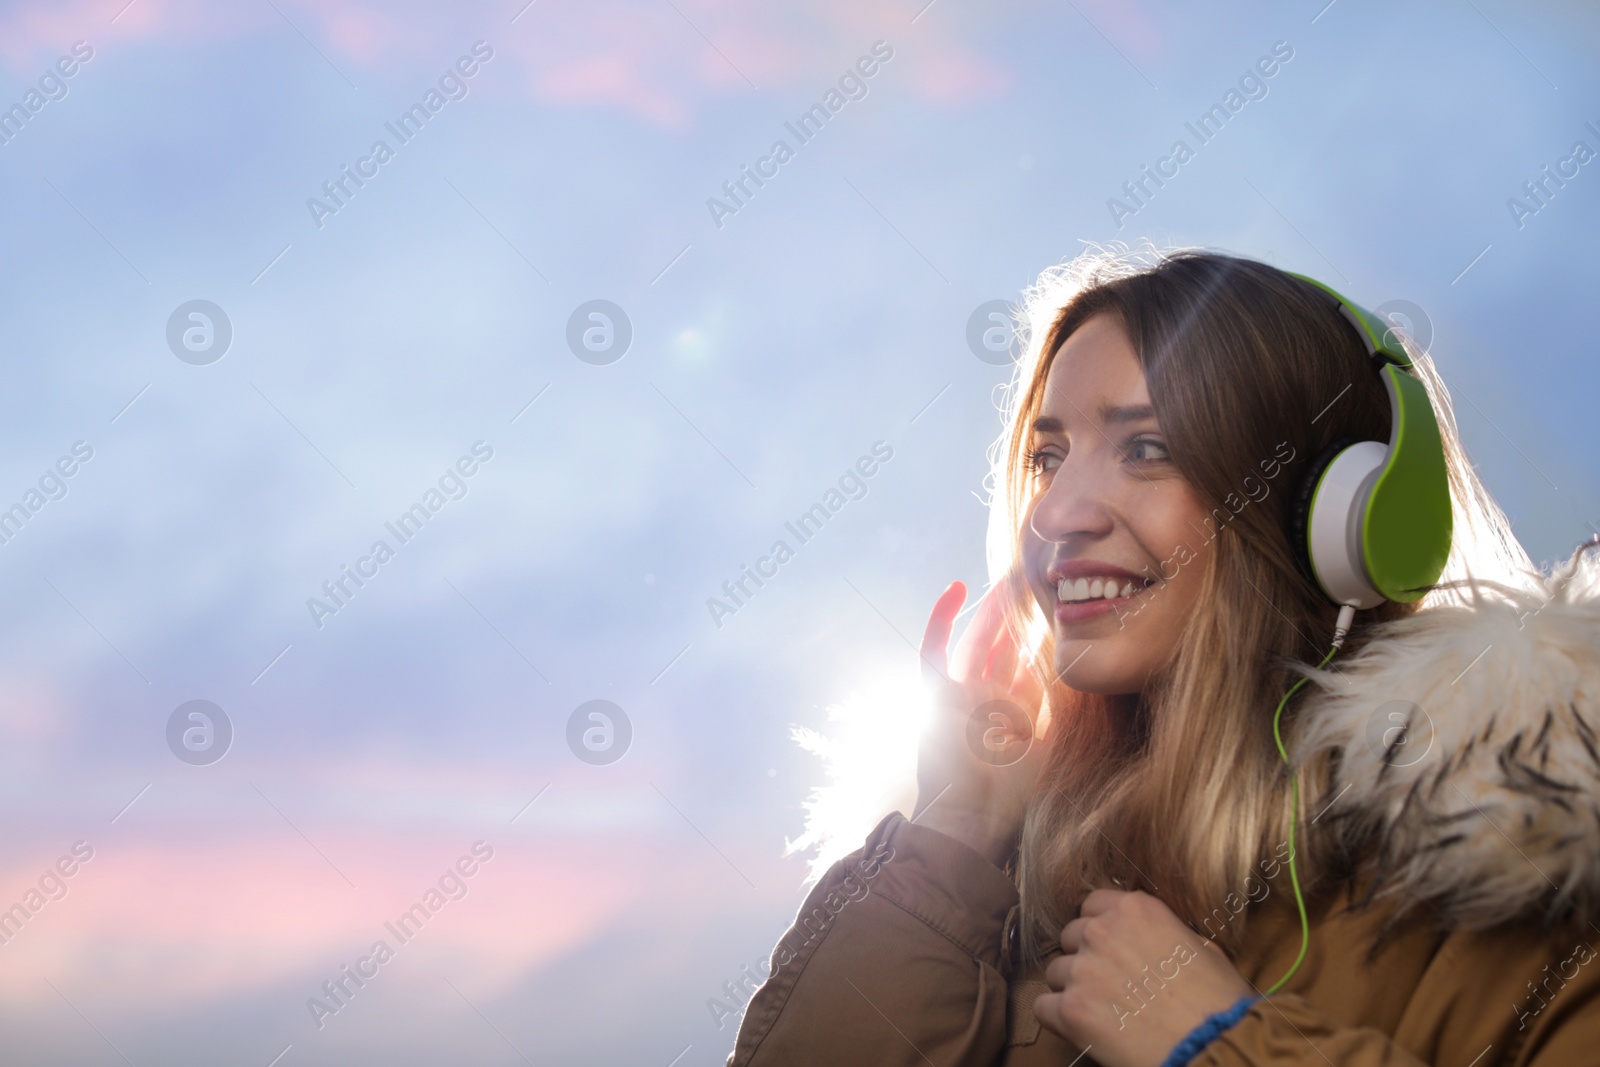 Photo of Young woman with headphones listening to music outdoors, space for text